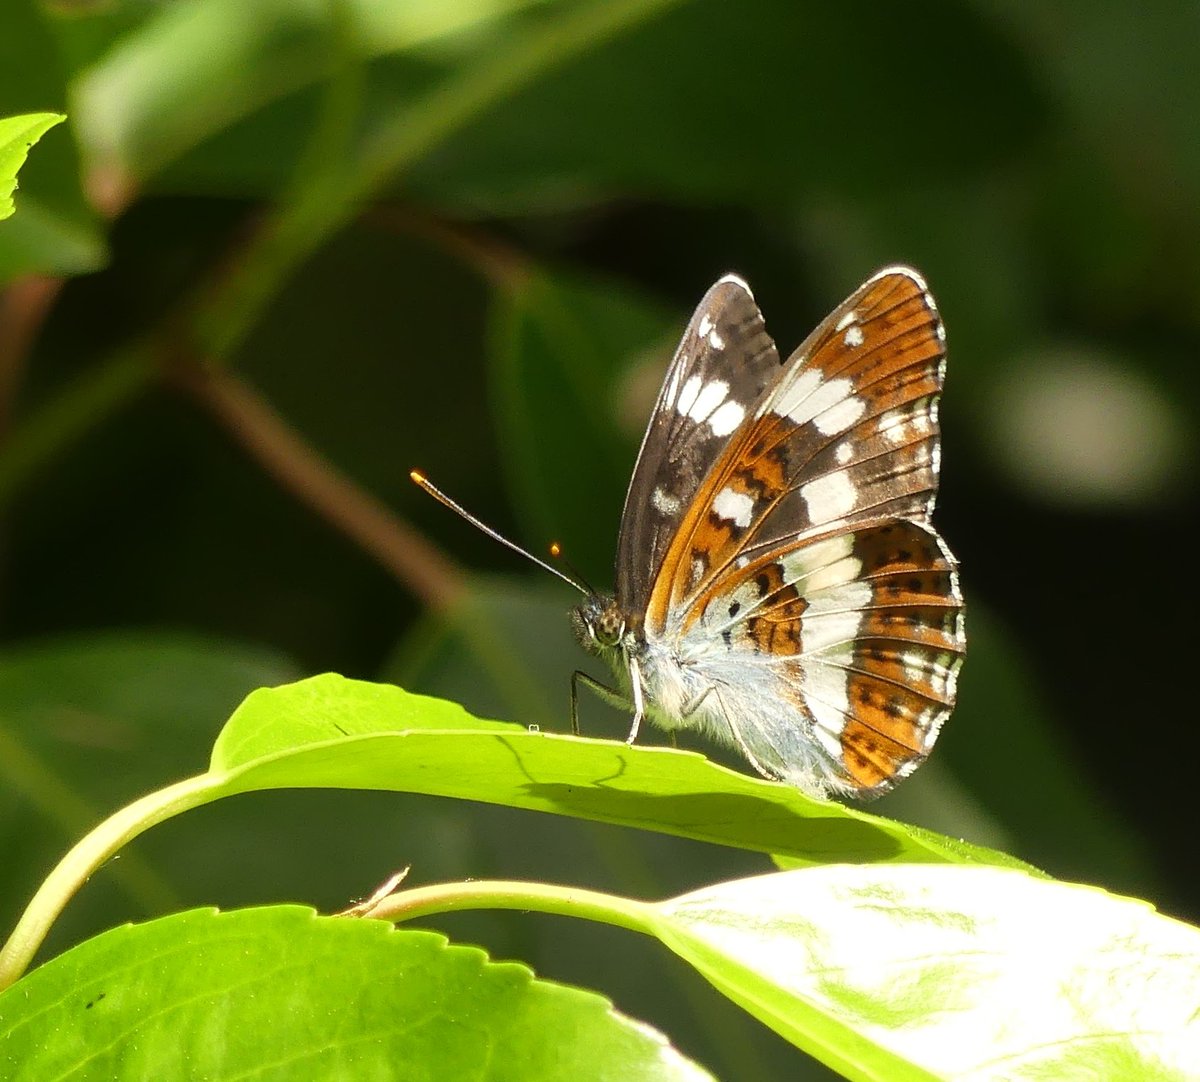 White admiral #Buckinghamshire in a brief sunny spell this afternoon, I found this WA in #MK #NaturePhotography #Butterflies @UpperThamesBC @TheParksTrust